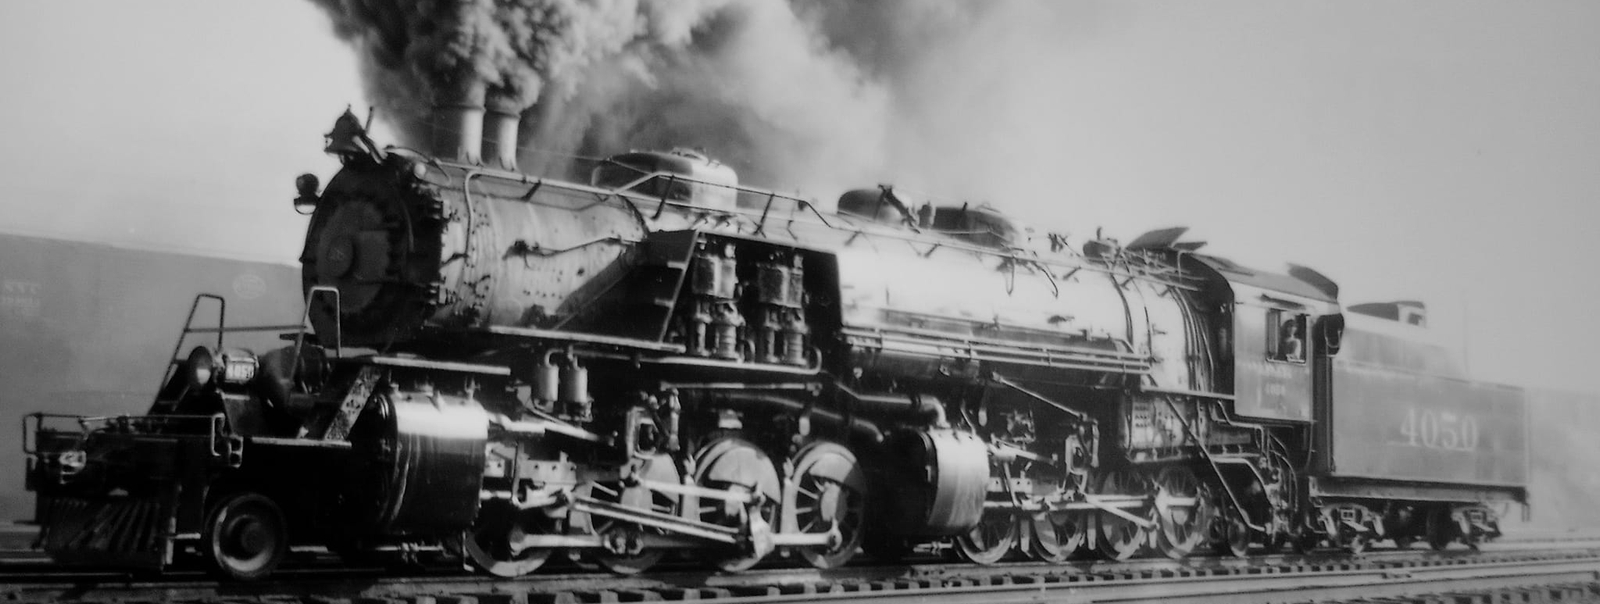 No. 4050 in August 1948 in Knoxville, Tennessee